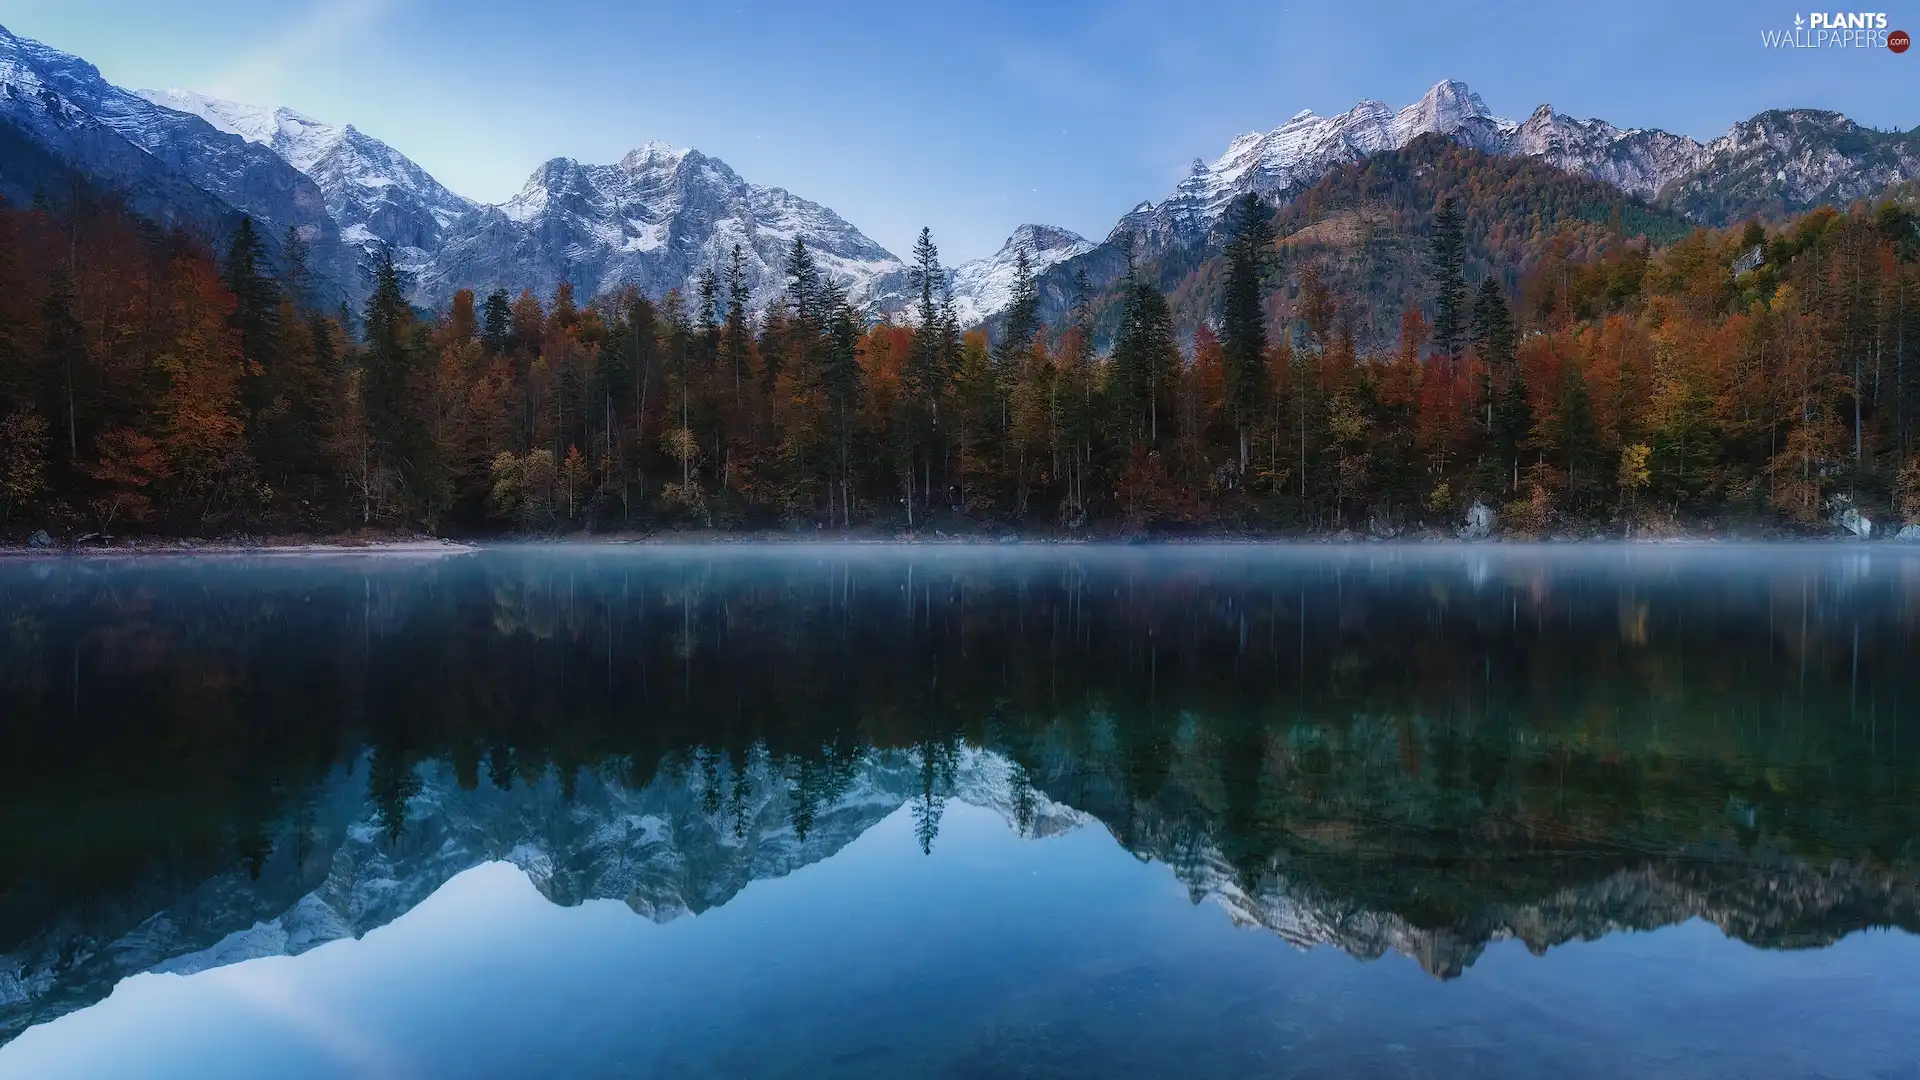 lake, Yellowed, reflection, trees, Fog, Mountains, Snowy, viewes